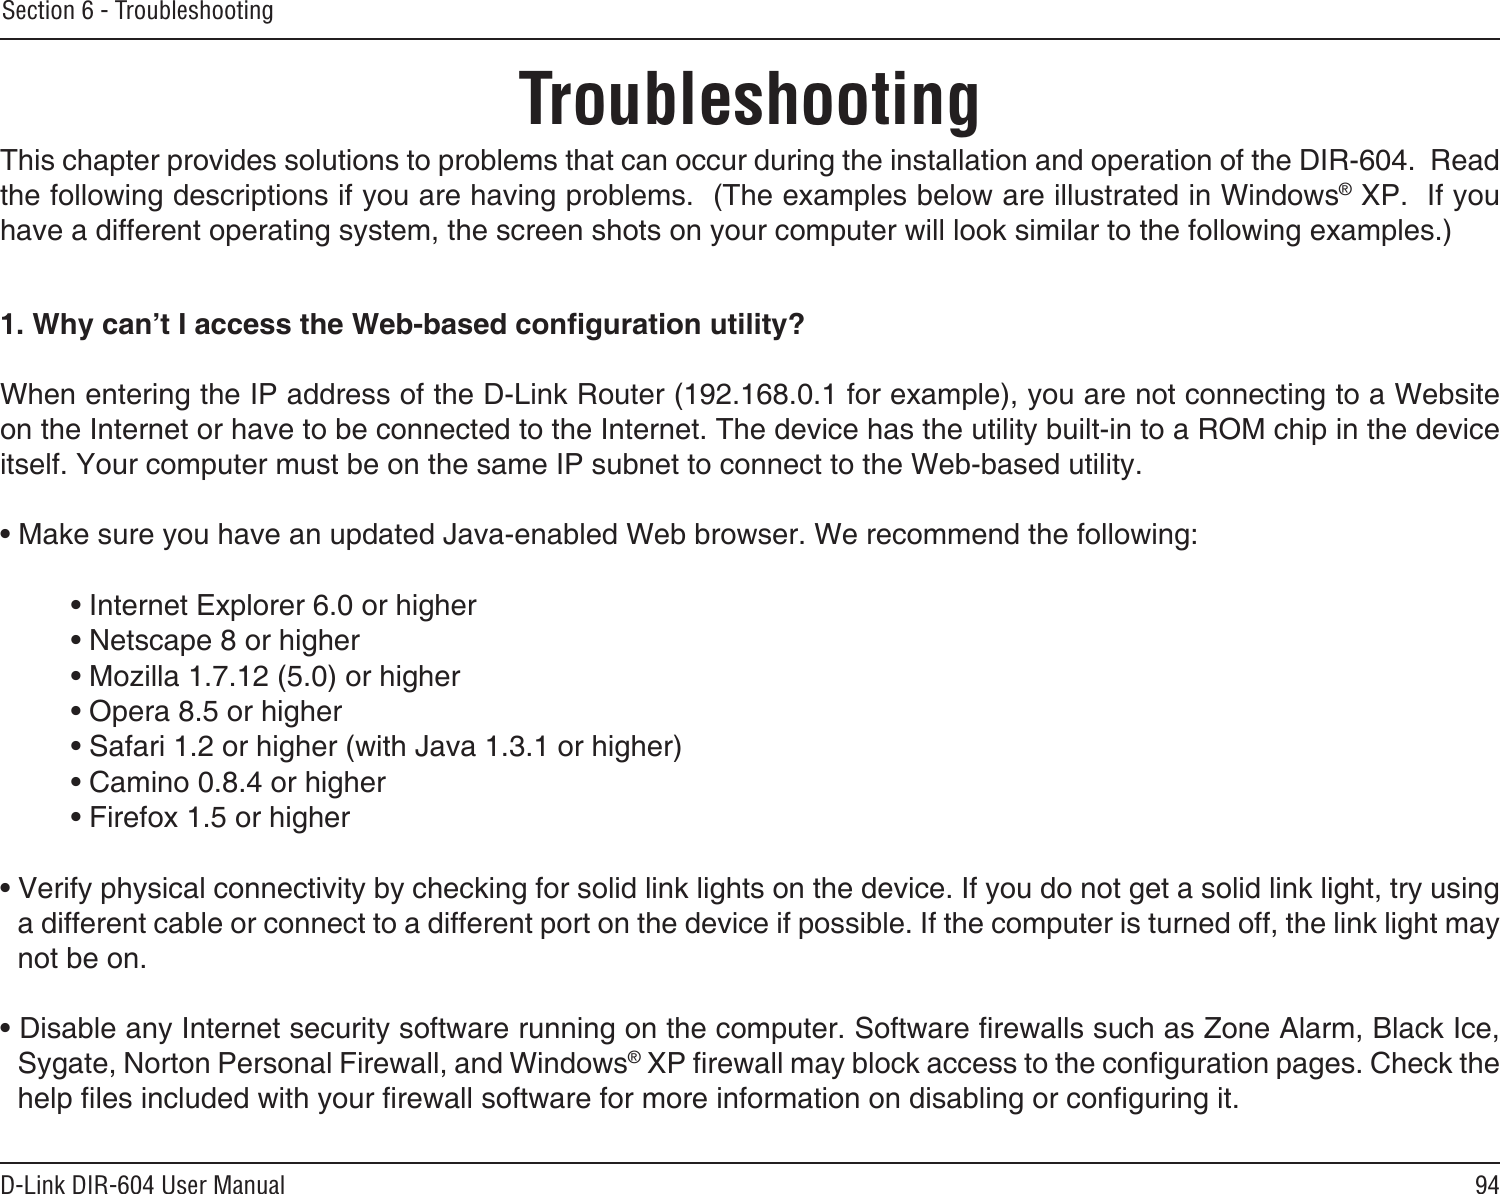 94D-Link DIR-604 User ManualSection 6 - TroubleshootingTroubleshootingThis chapter provides solutions to problems that can occur during the installation and operation of the DIR-604.  Read the following descriptions if you are having problems.  (The examples below are illustrated in Windows® XP.  If you have a different operating system, the screen shots on your computer will look similar to the following examples.)1. Why can’t I access the Web-based conguration utility?When entering the IP address of the D-Link Router (192.168.0.1 for example), you are not connecting to a Website on the Internet or have to be connected to the Internet. The device has the utility built-in to a ROM chip in the device itself. Your computer must be on the same IP subnet to connect to the Web-based utility. • Make sure you have an updated Java-enabled Web browser. We recommend the following: • Internet Explorer 6.0 or higher • Netscape 8 or higher • Mozilla 1.7.12 (5.0) or higher • Opera 8.5 or higher • Safari 1.2 or higher (with Java 1.3.1 or higher) • Camino 0.8.4 or higher • Firefox 1.5 or higher • Verify physical connectivity by checking for solid link lights on the device. If you do not get a solid link light, try using a different cable or connect to a different port on the device if possible. If the computer is turned off, the link light may not be on.• Disable any Internet security software running on the computer. Software rewalls such as Zone Alarm, Black Ice, Sygate, Norton Personal Firewall, and Windows® XP rewall may block access to the conguration pages. Check the help les included with your rewall software for more information on disabling or conguring it.